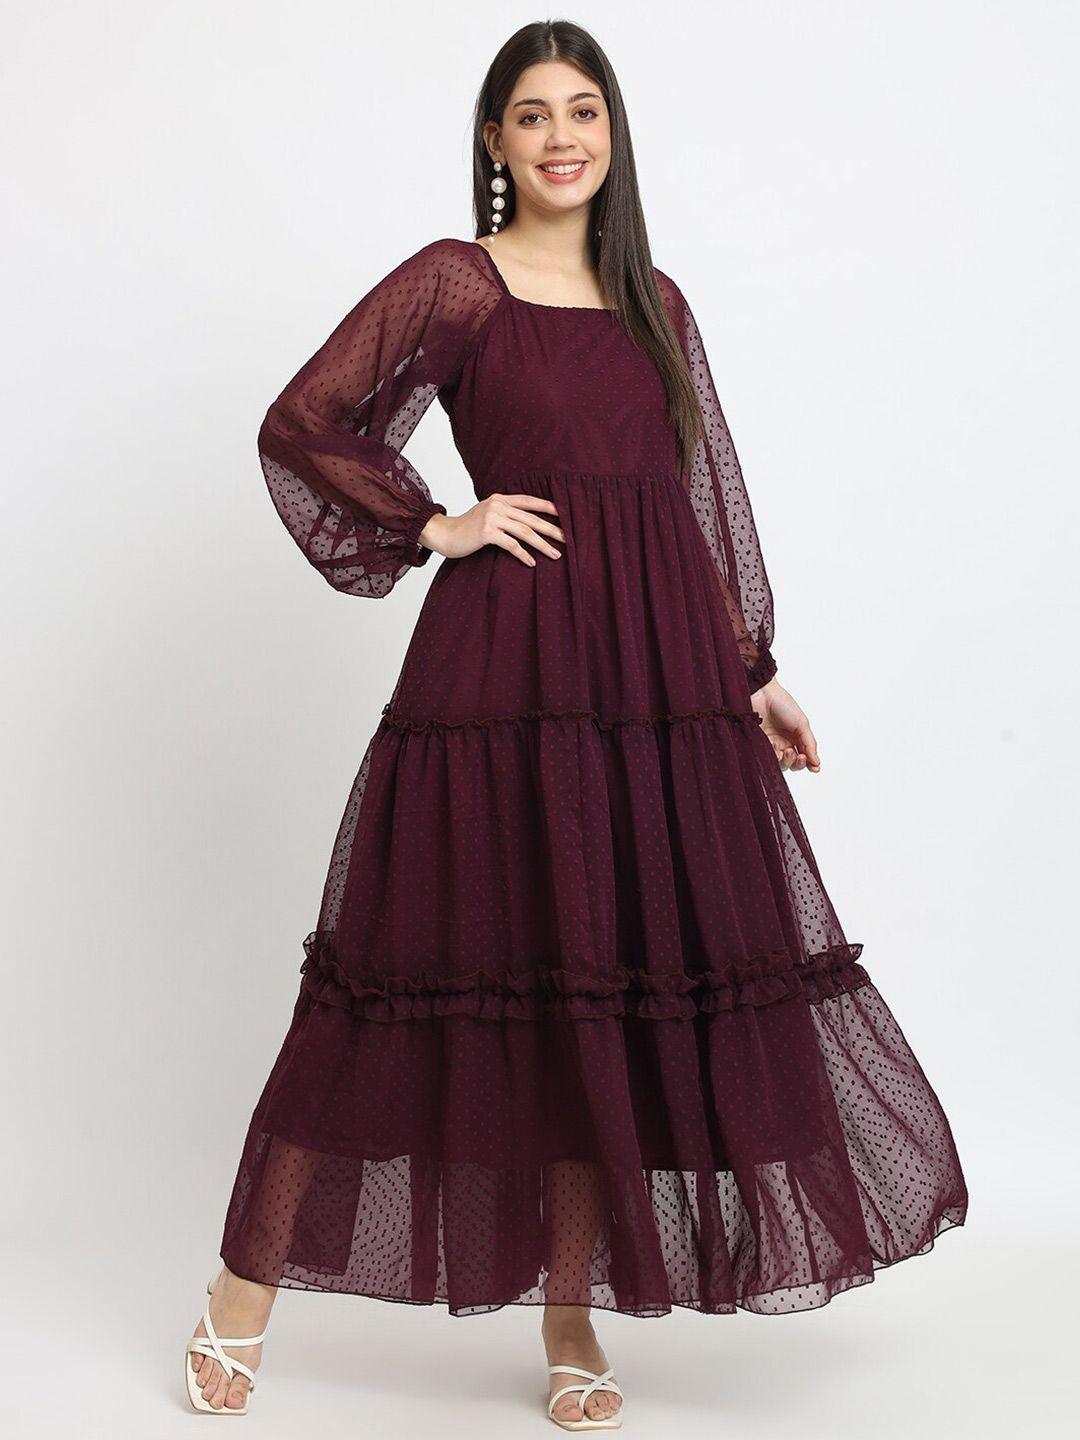 isam-burgundy-floral-puff-sleeve-ruffled-georgette-fit-&-flare-maxi-dress